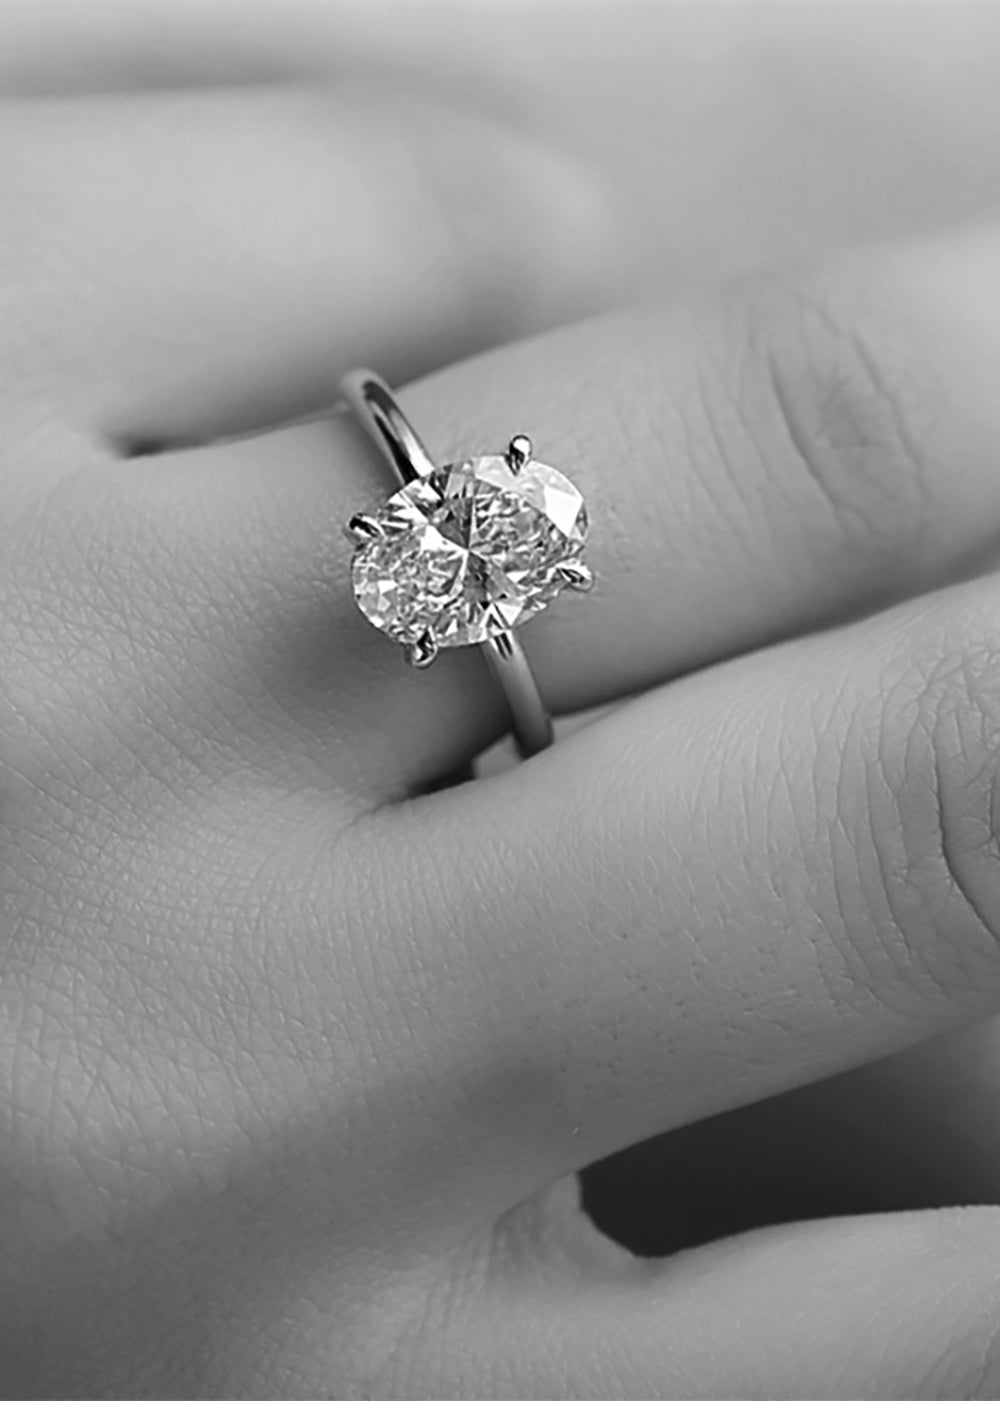 Shop by category diamond engagement rings